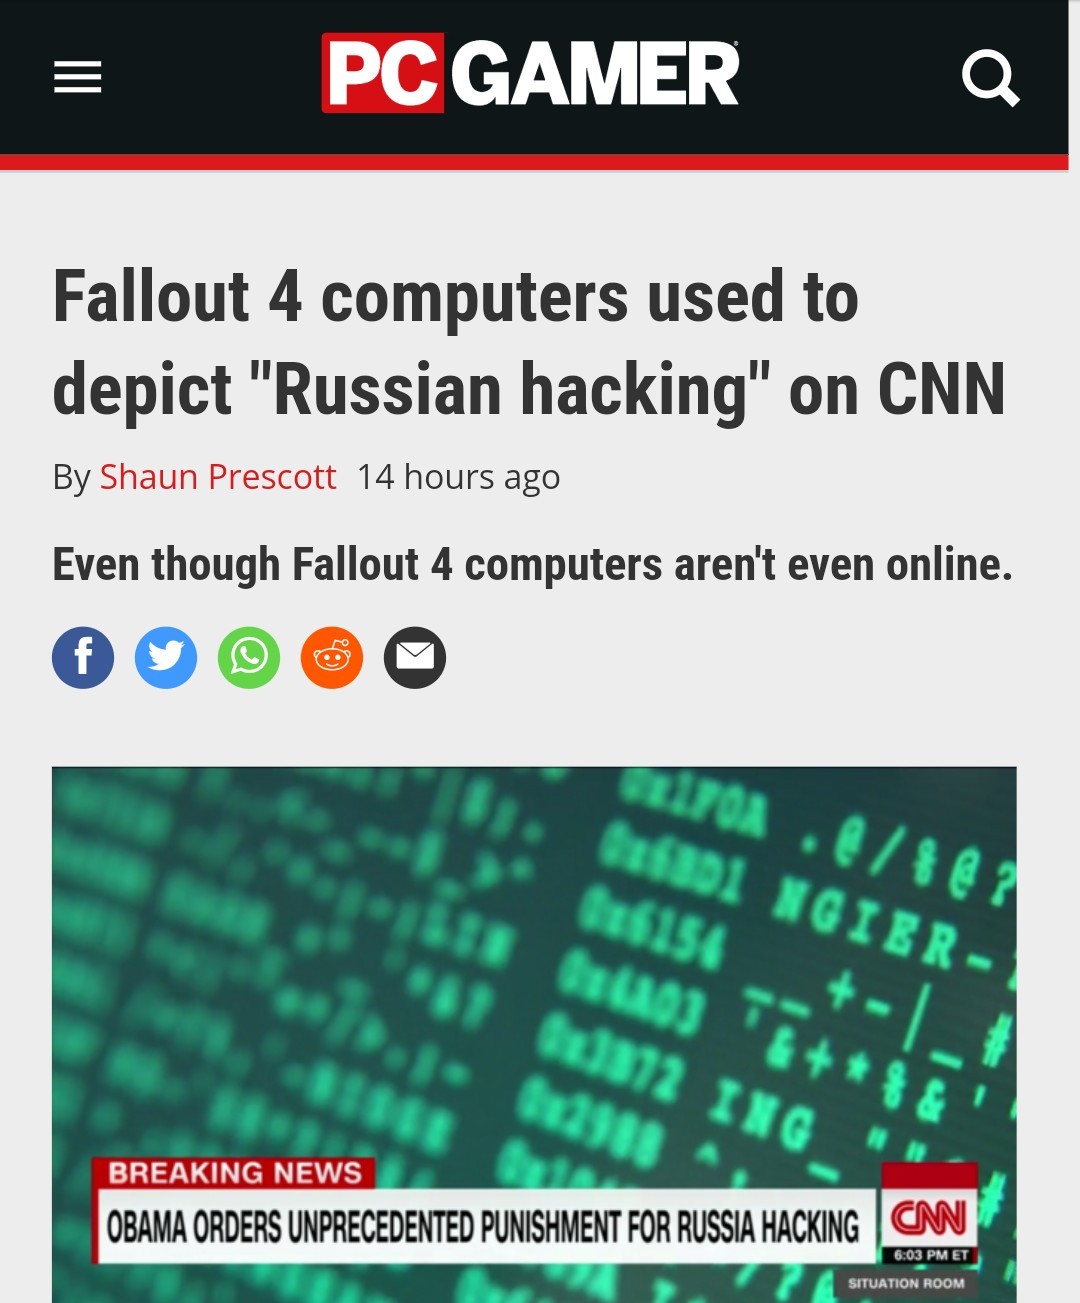 Those crafty Russians... using Fallout to hack us! - meme